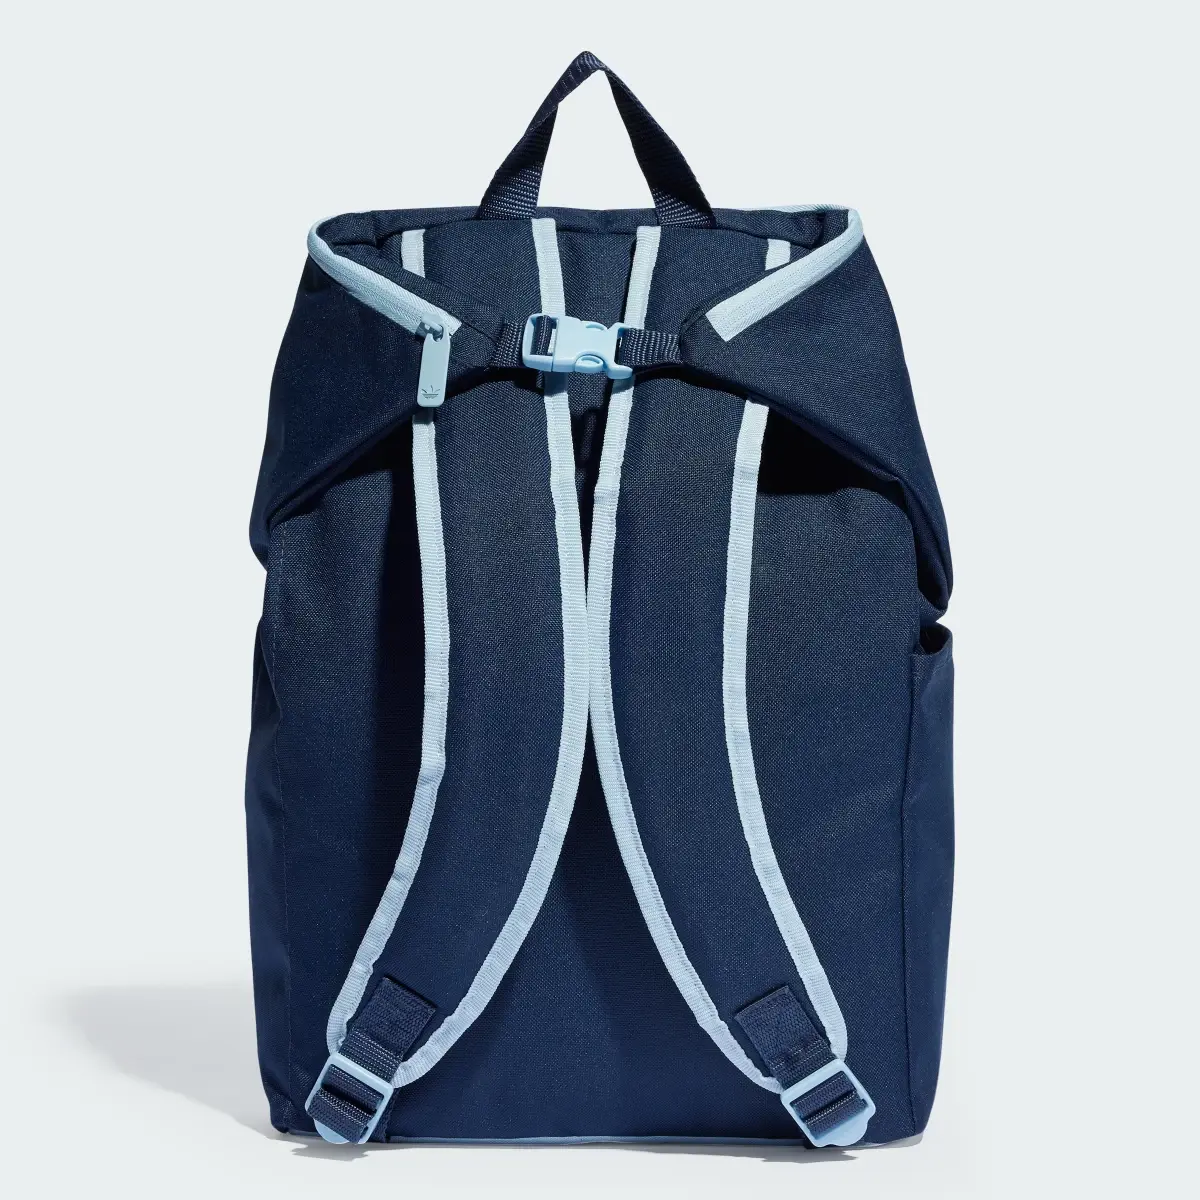 Adidas Collegiate Youth Backpack. 3